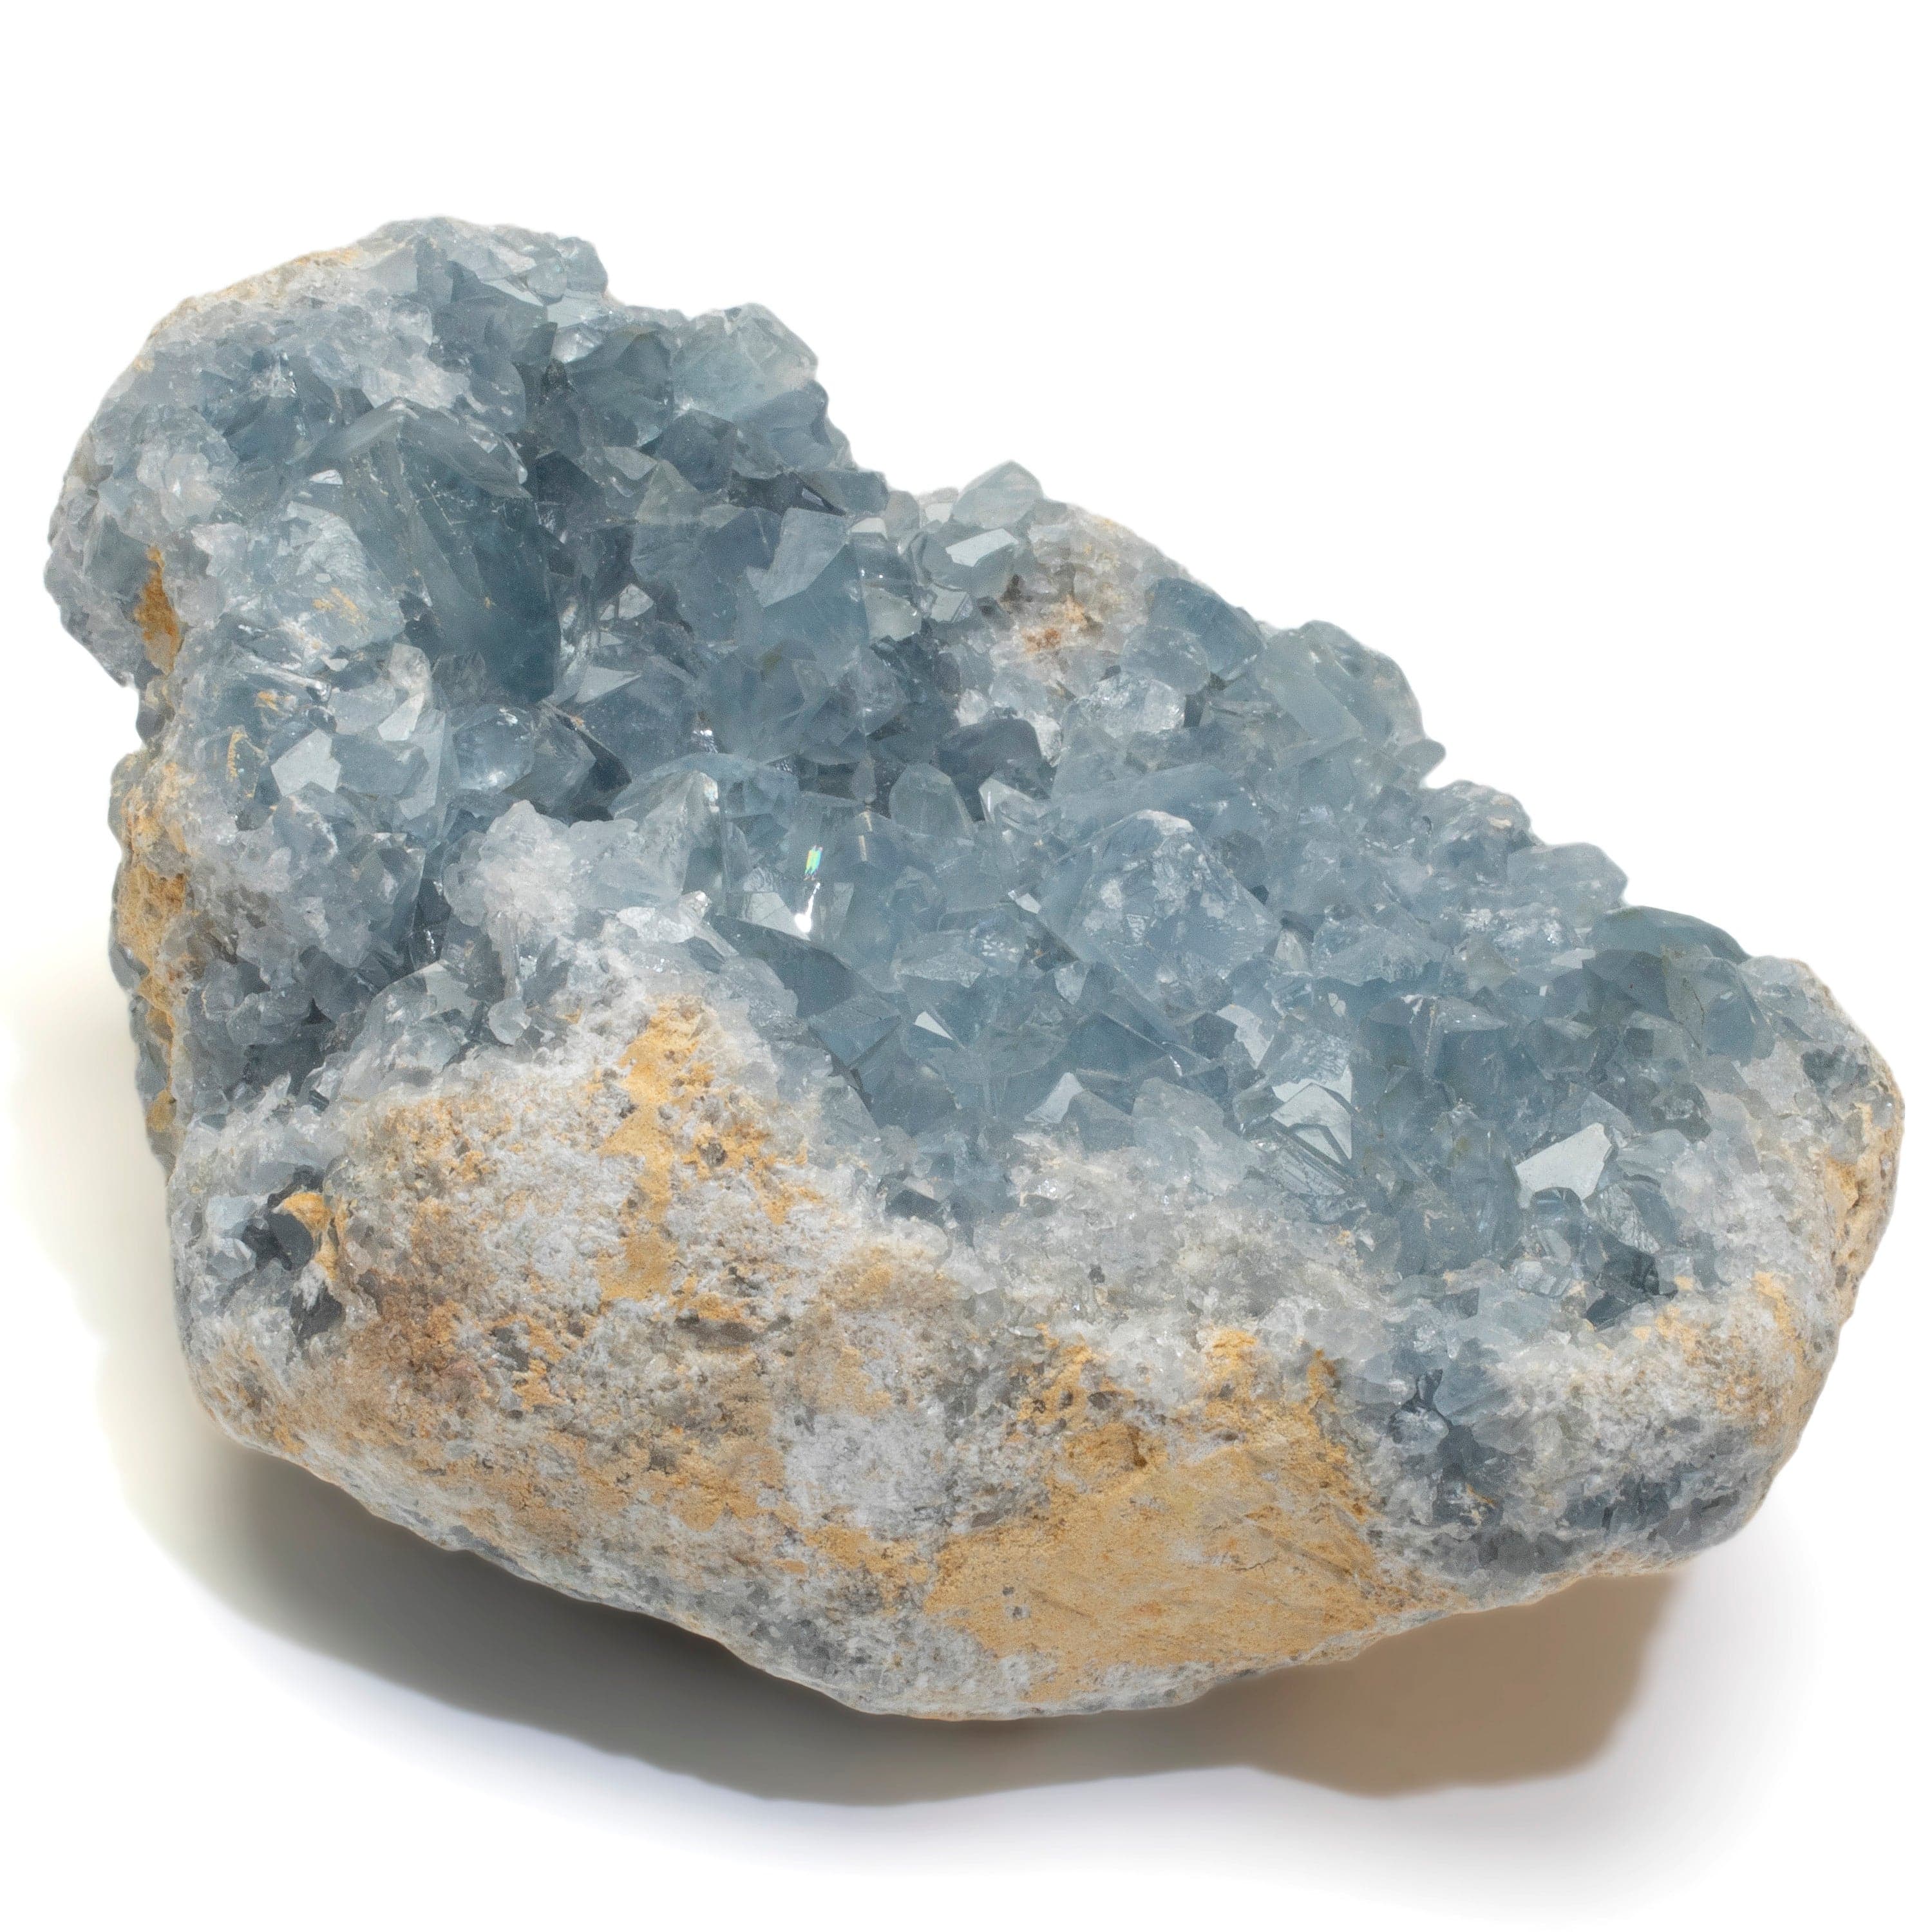 Kalifano Celestite Natural Celestite Crystal Cluster Geode from Madagascar - 8 in. CG1400.005